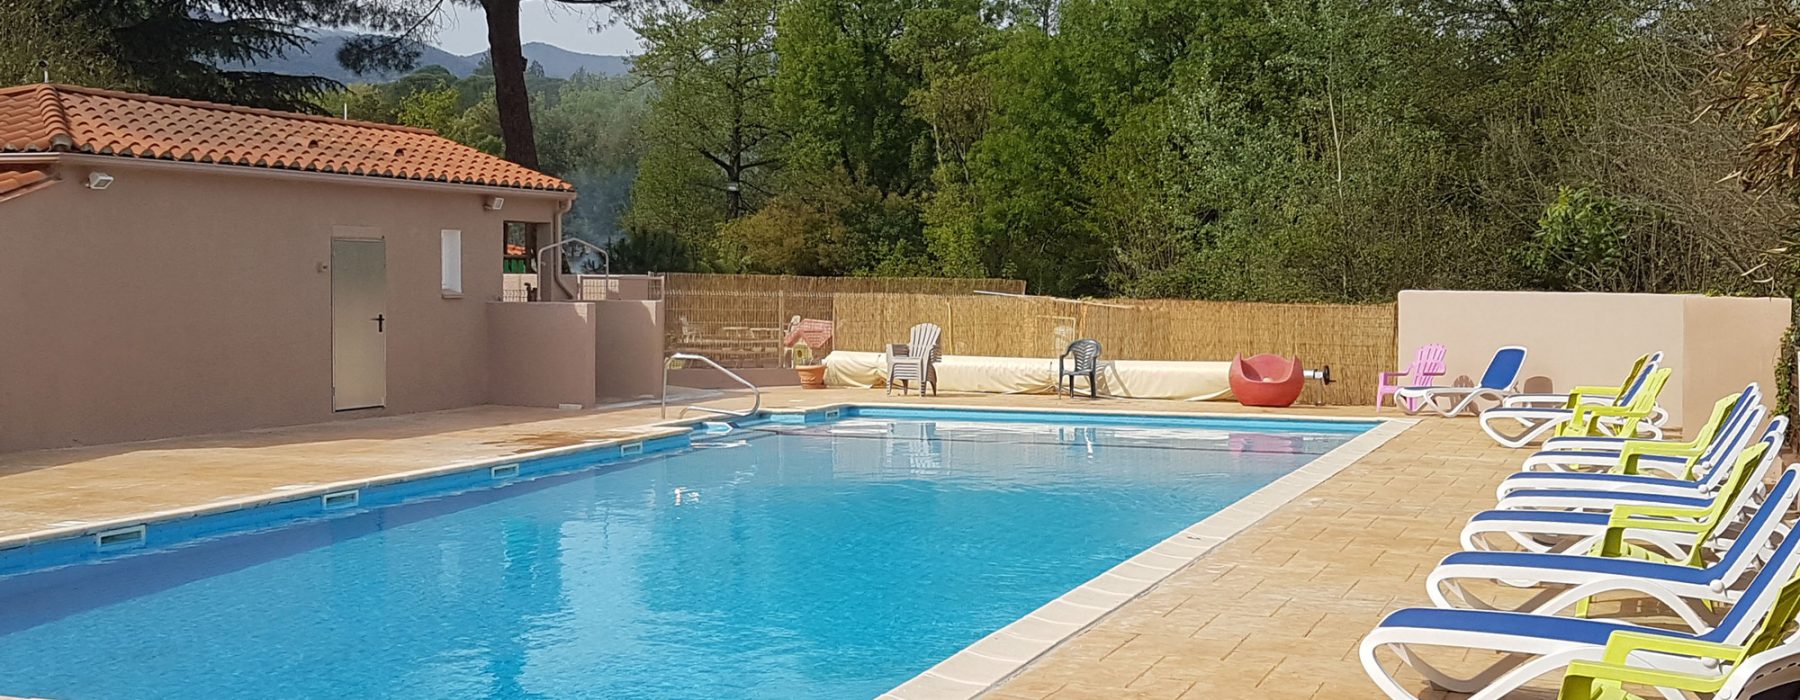 piscine camping le boulou